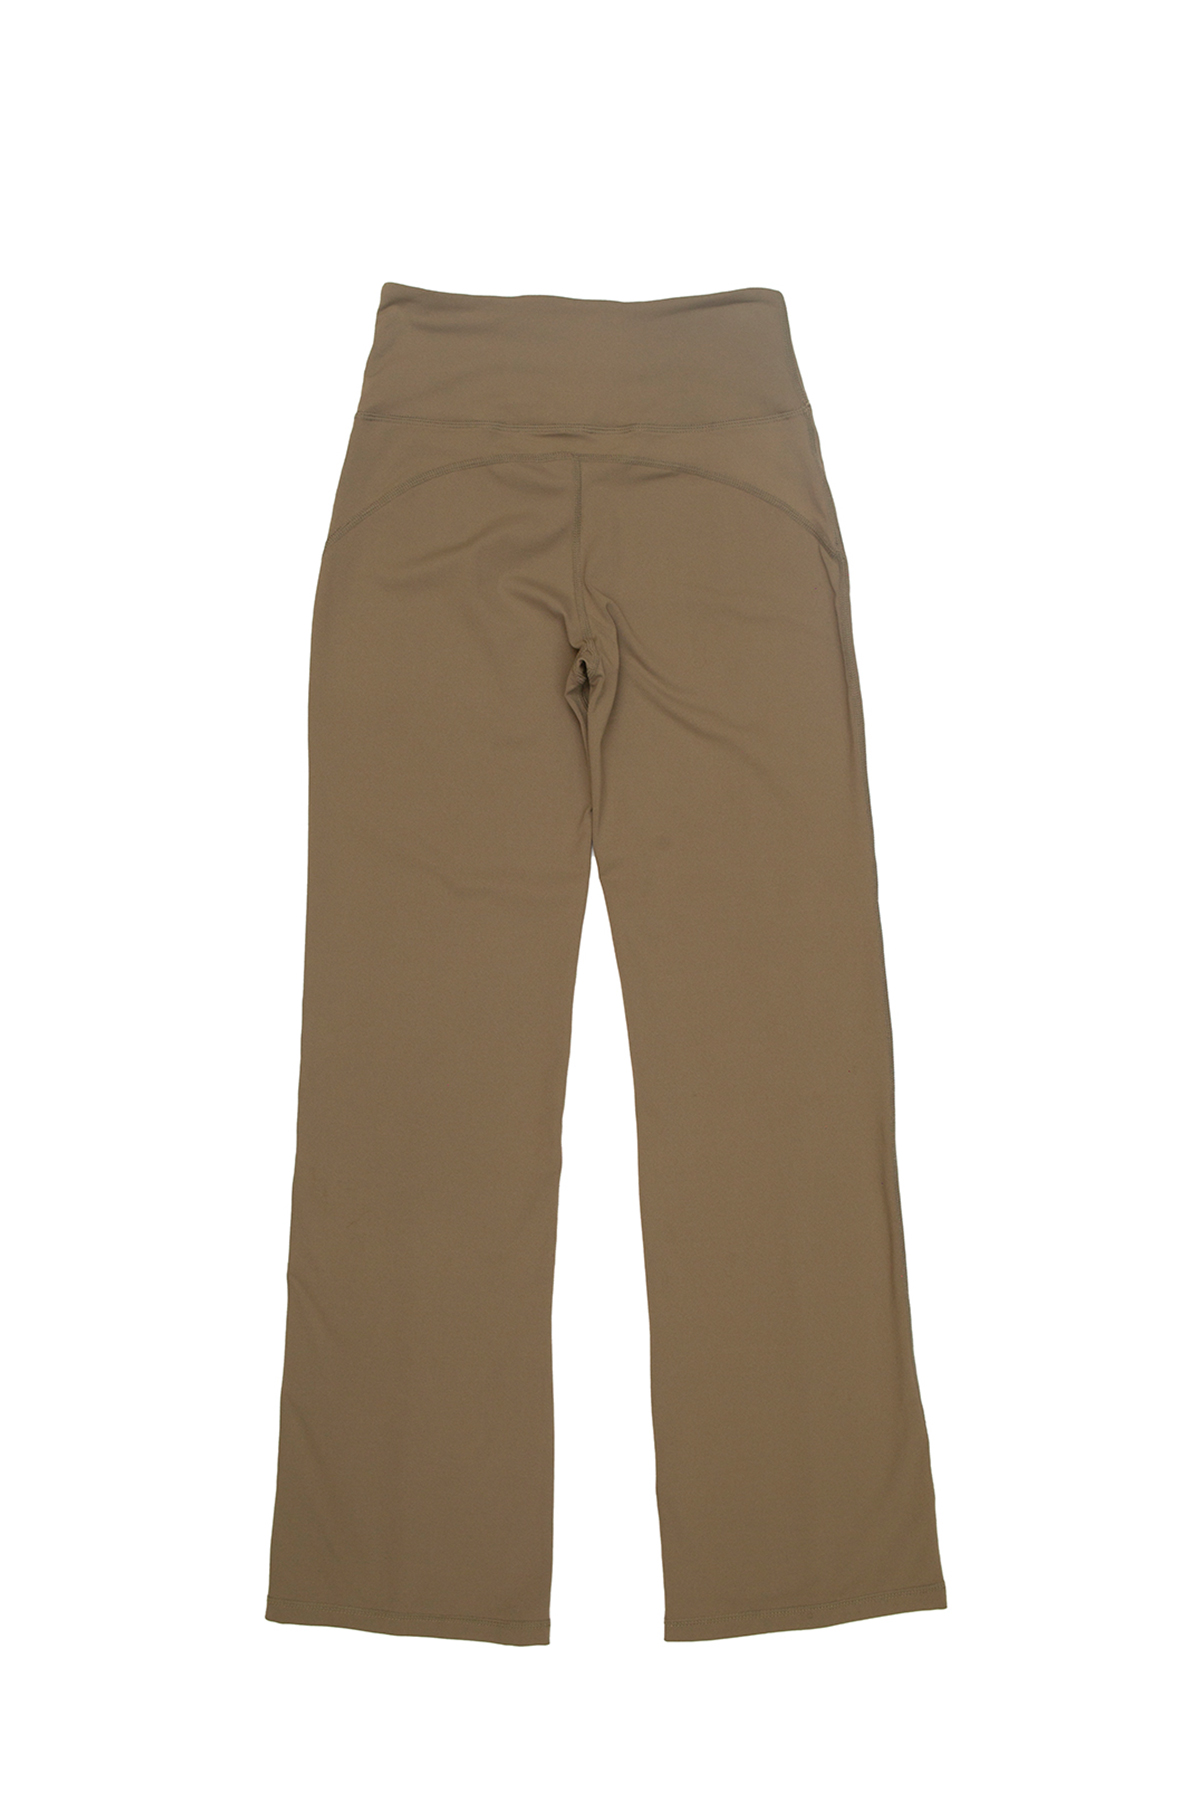 Time-Out-X-Flare-Yoga-Ankle-Slit-Pants—Olive-Green—Back